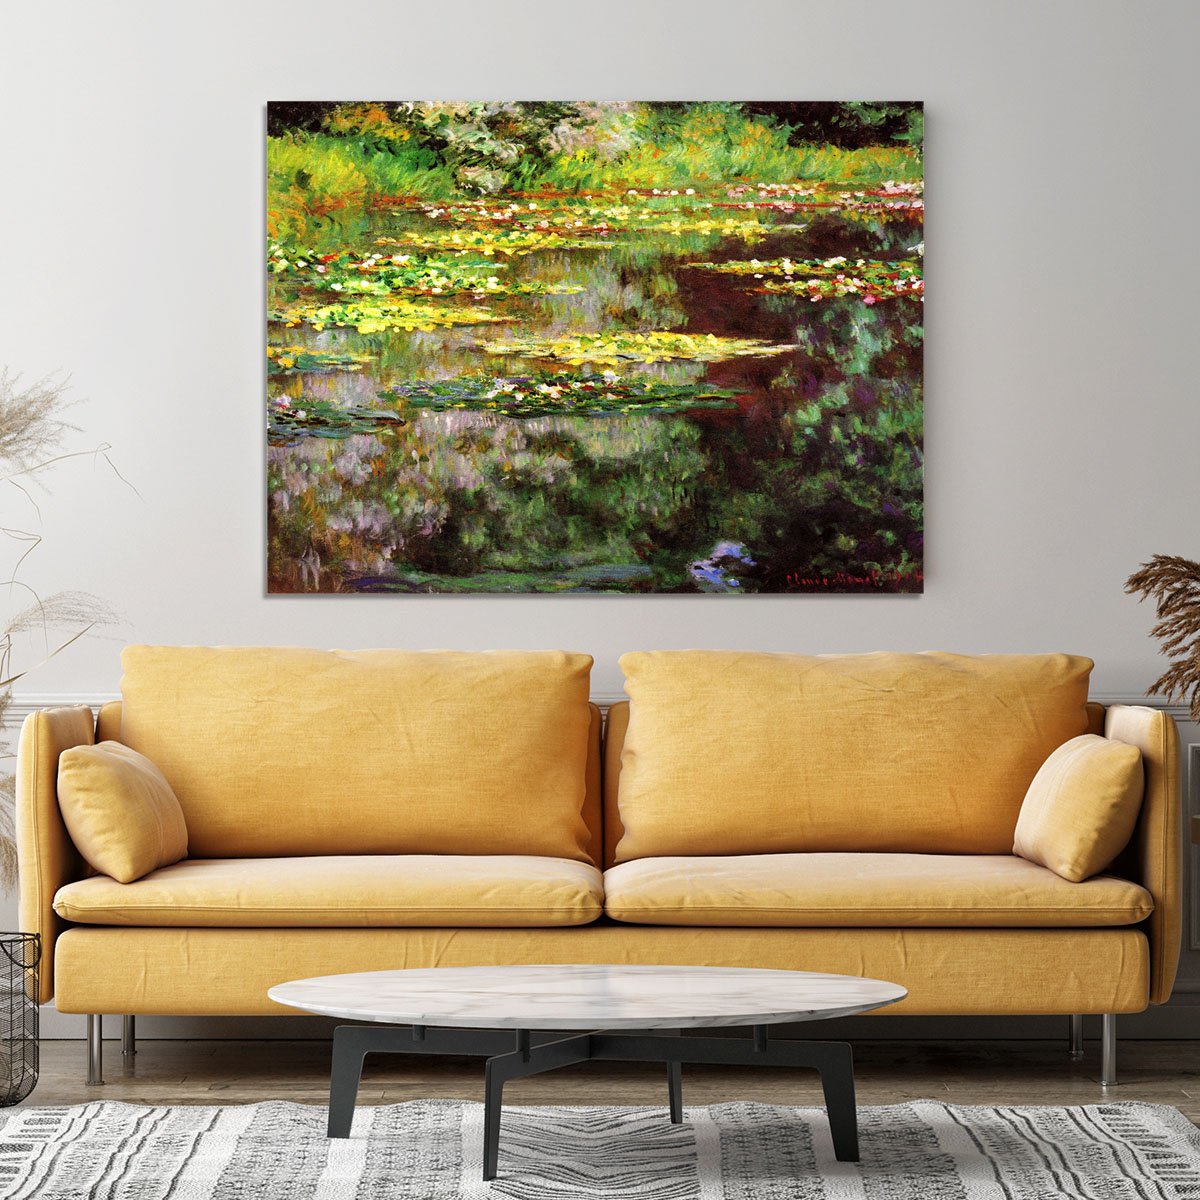 Sea rose pond by Monet Canvas Print or Poster